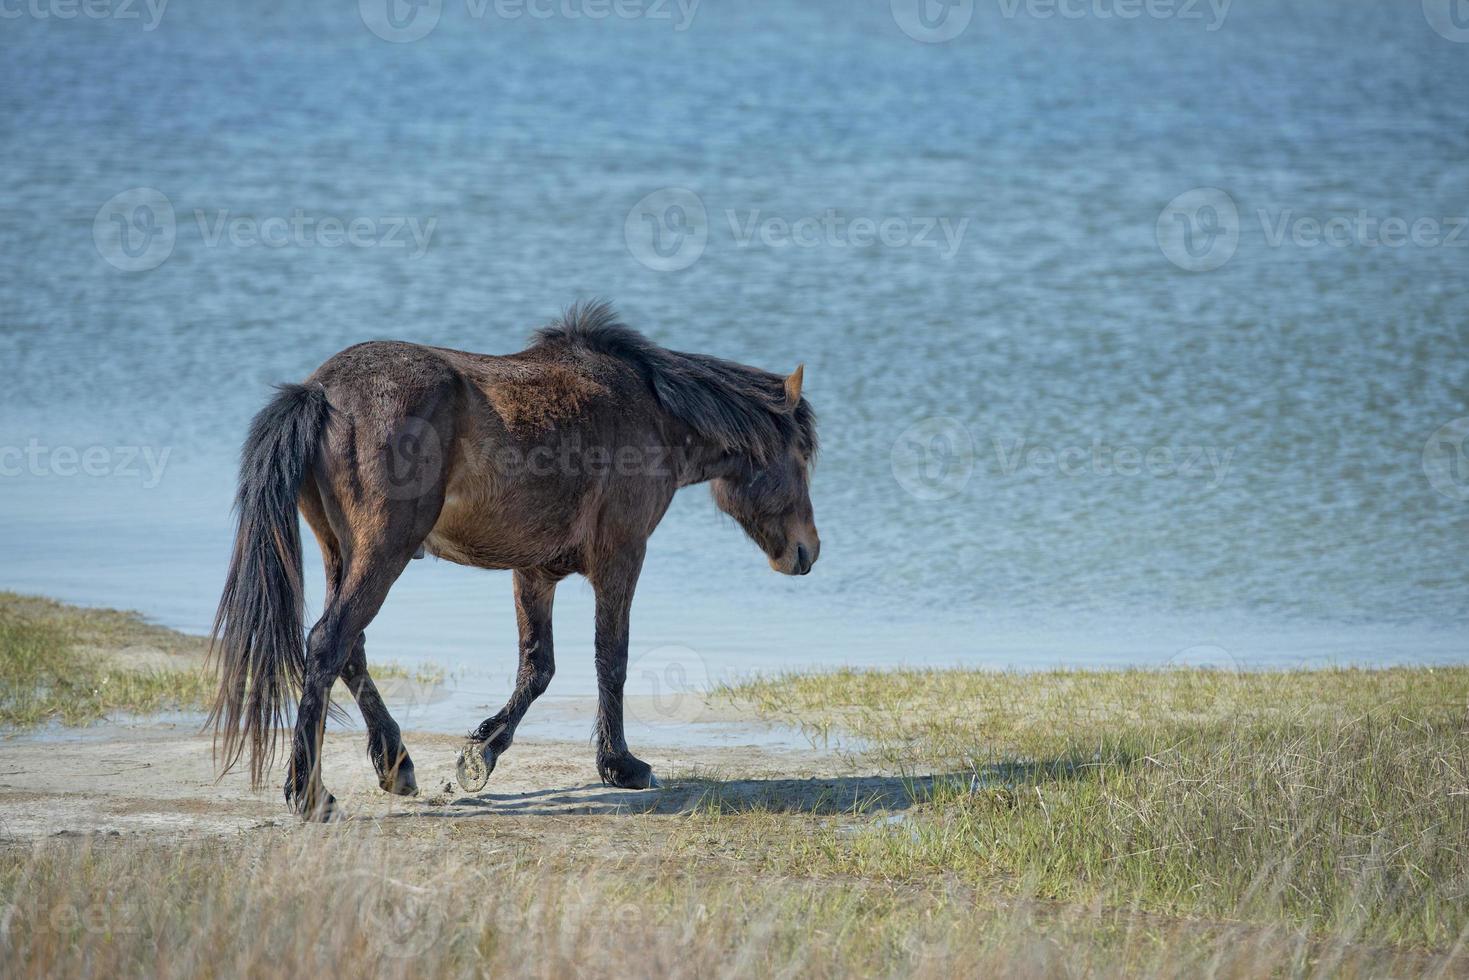 Assateague horse baby young puppy wild pony photo